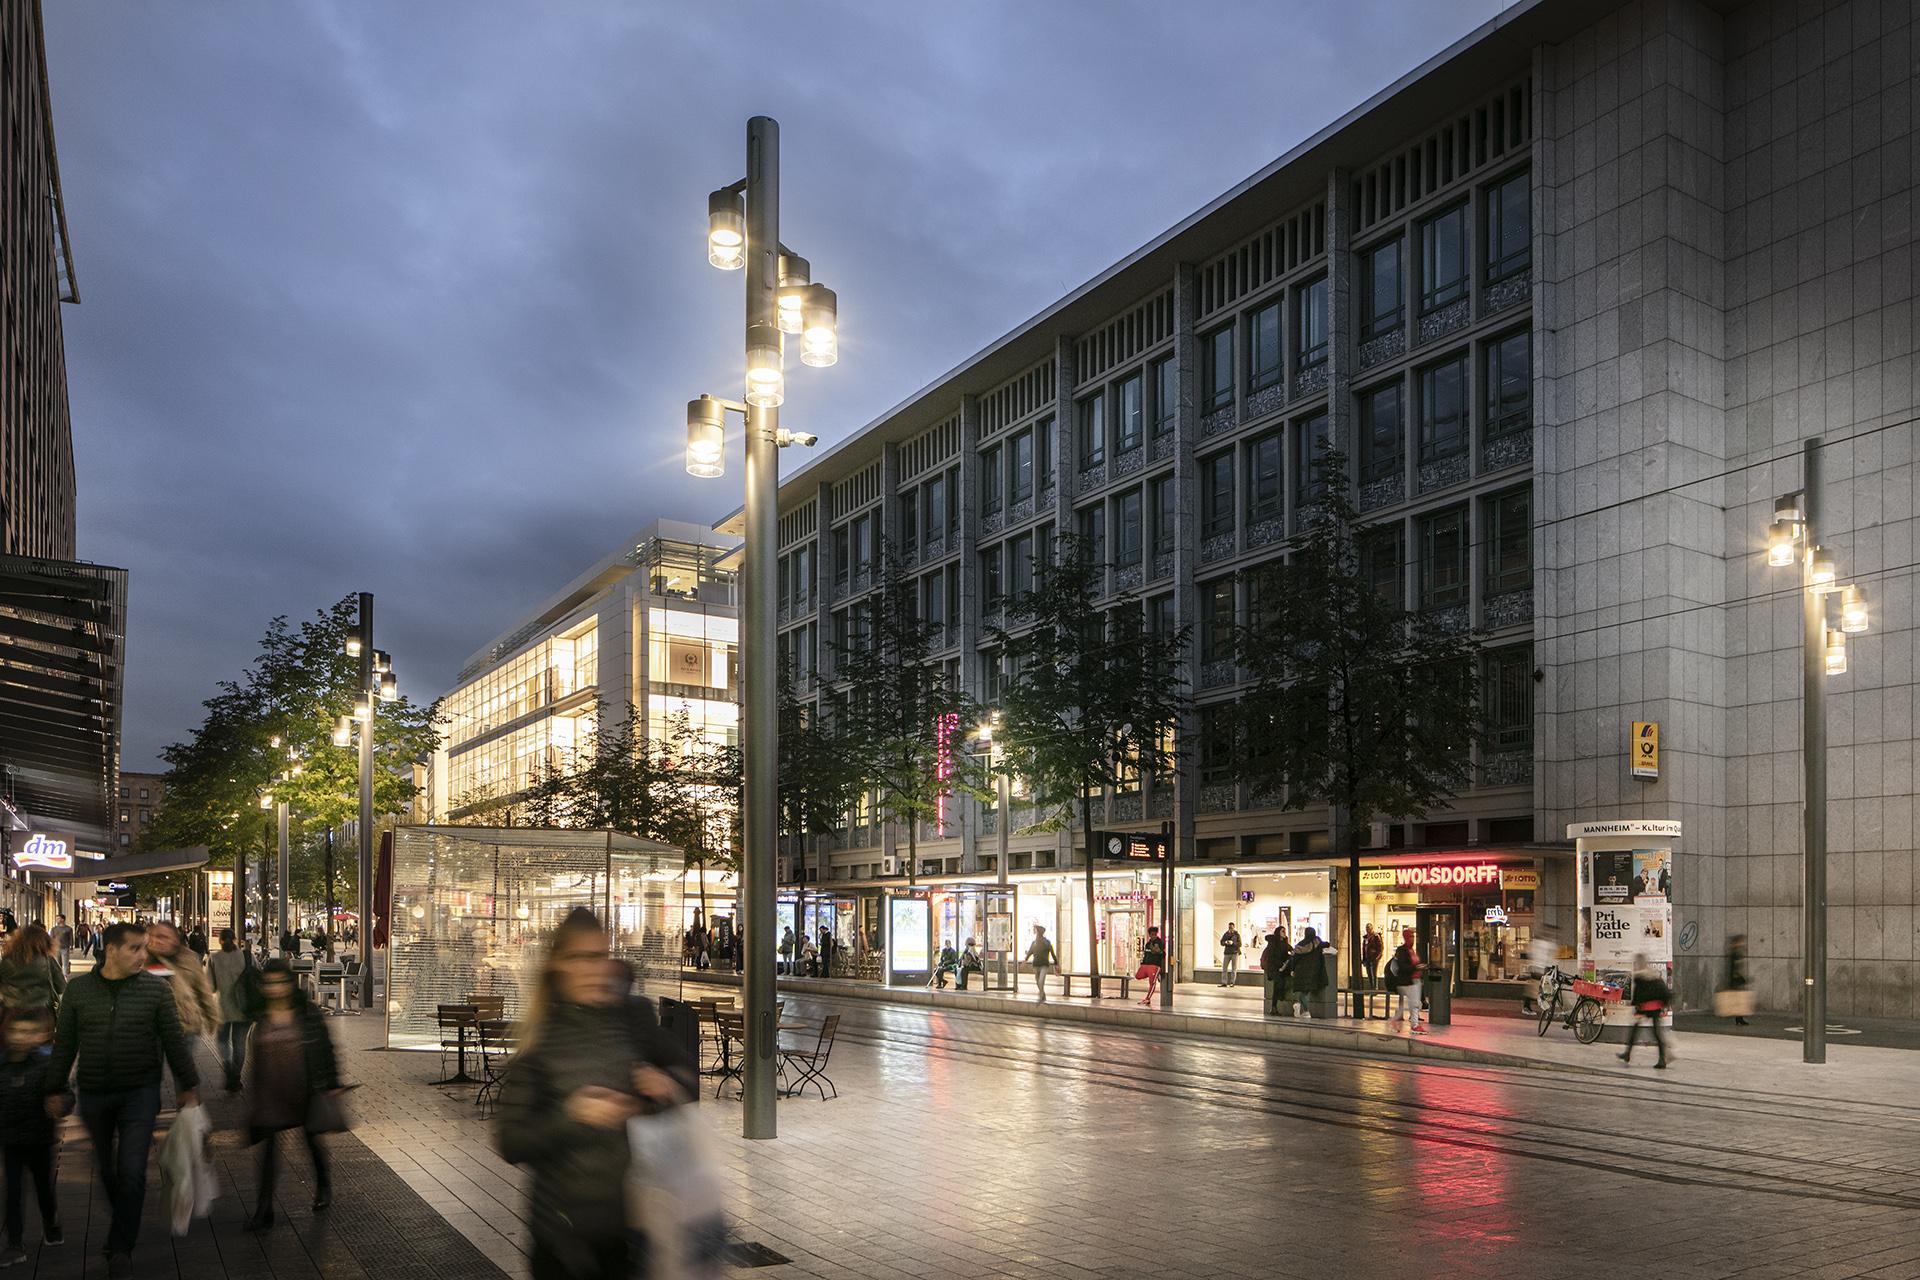 Schréder designed a customised luminaire to light the famous Planken shopping haven that reflects the city’s character